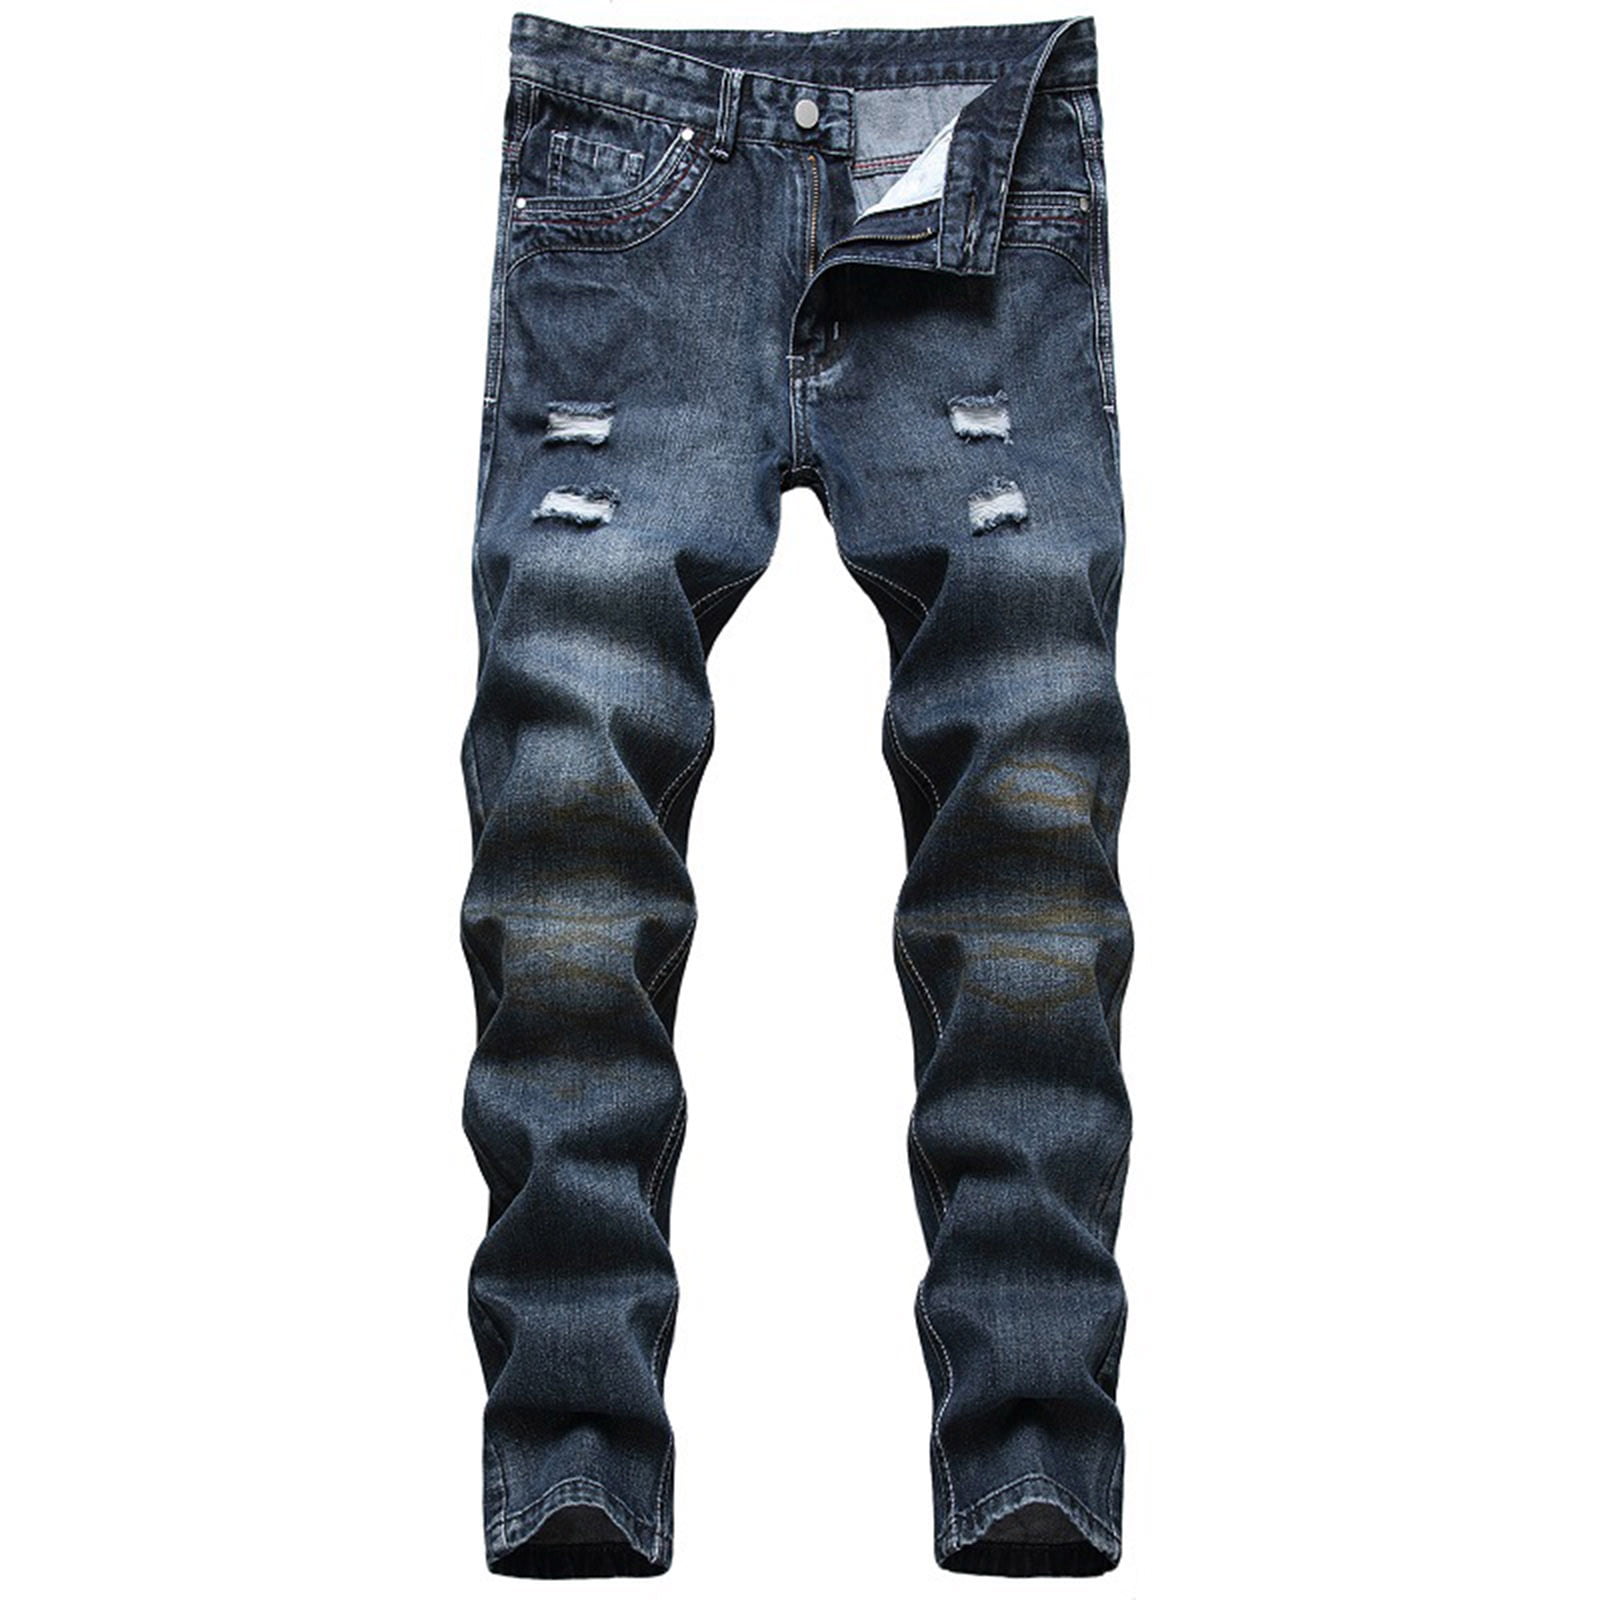 symoid Mens Jeans- High-end Ripped Printed Trendy Slim Jeans Blue ...